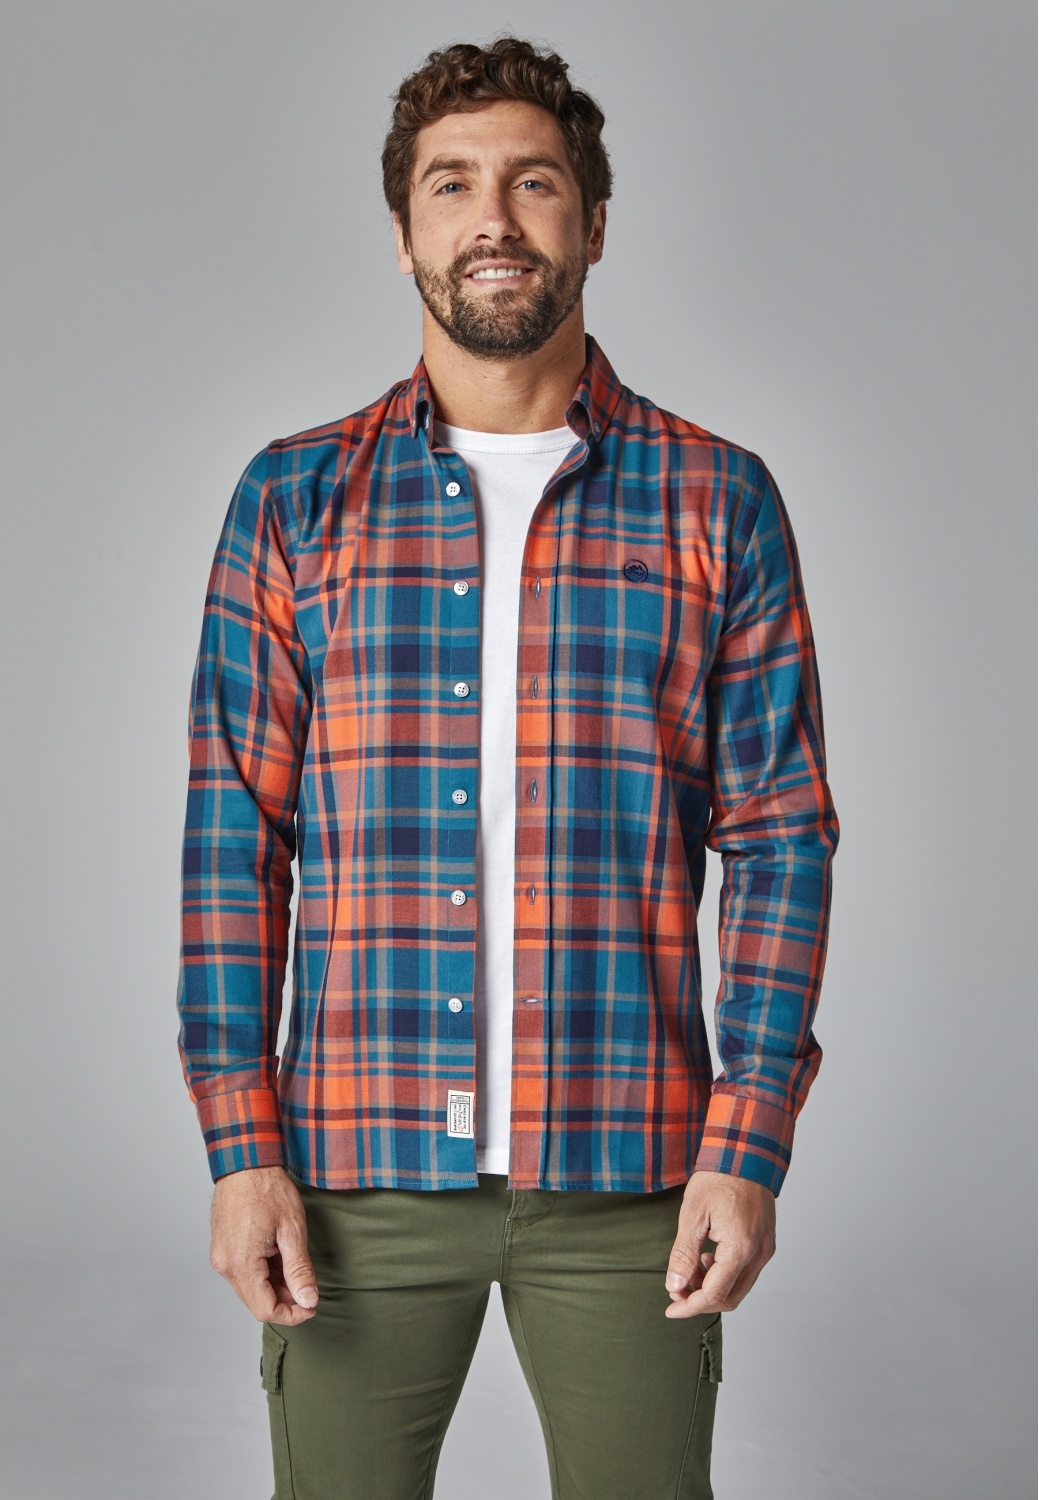 PLAID SHIRT IN BLUE AND ORANGE